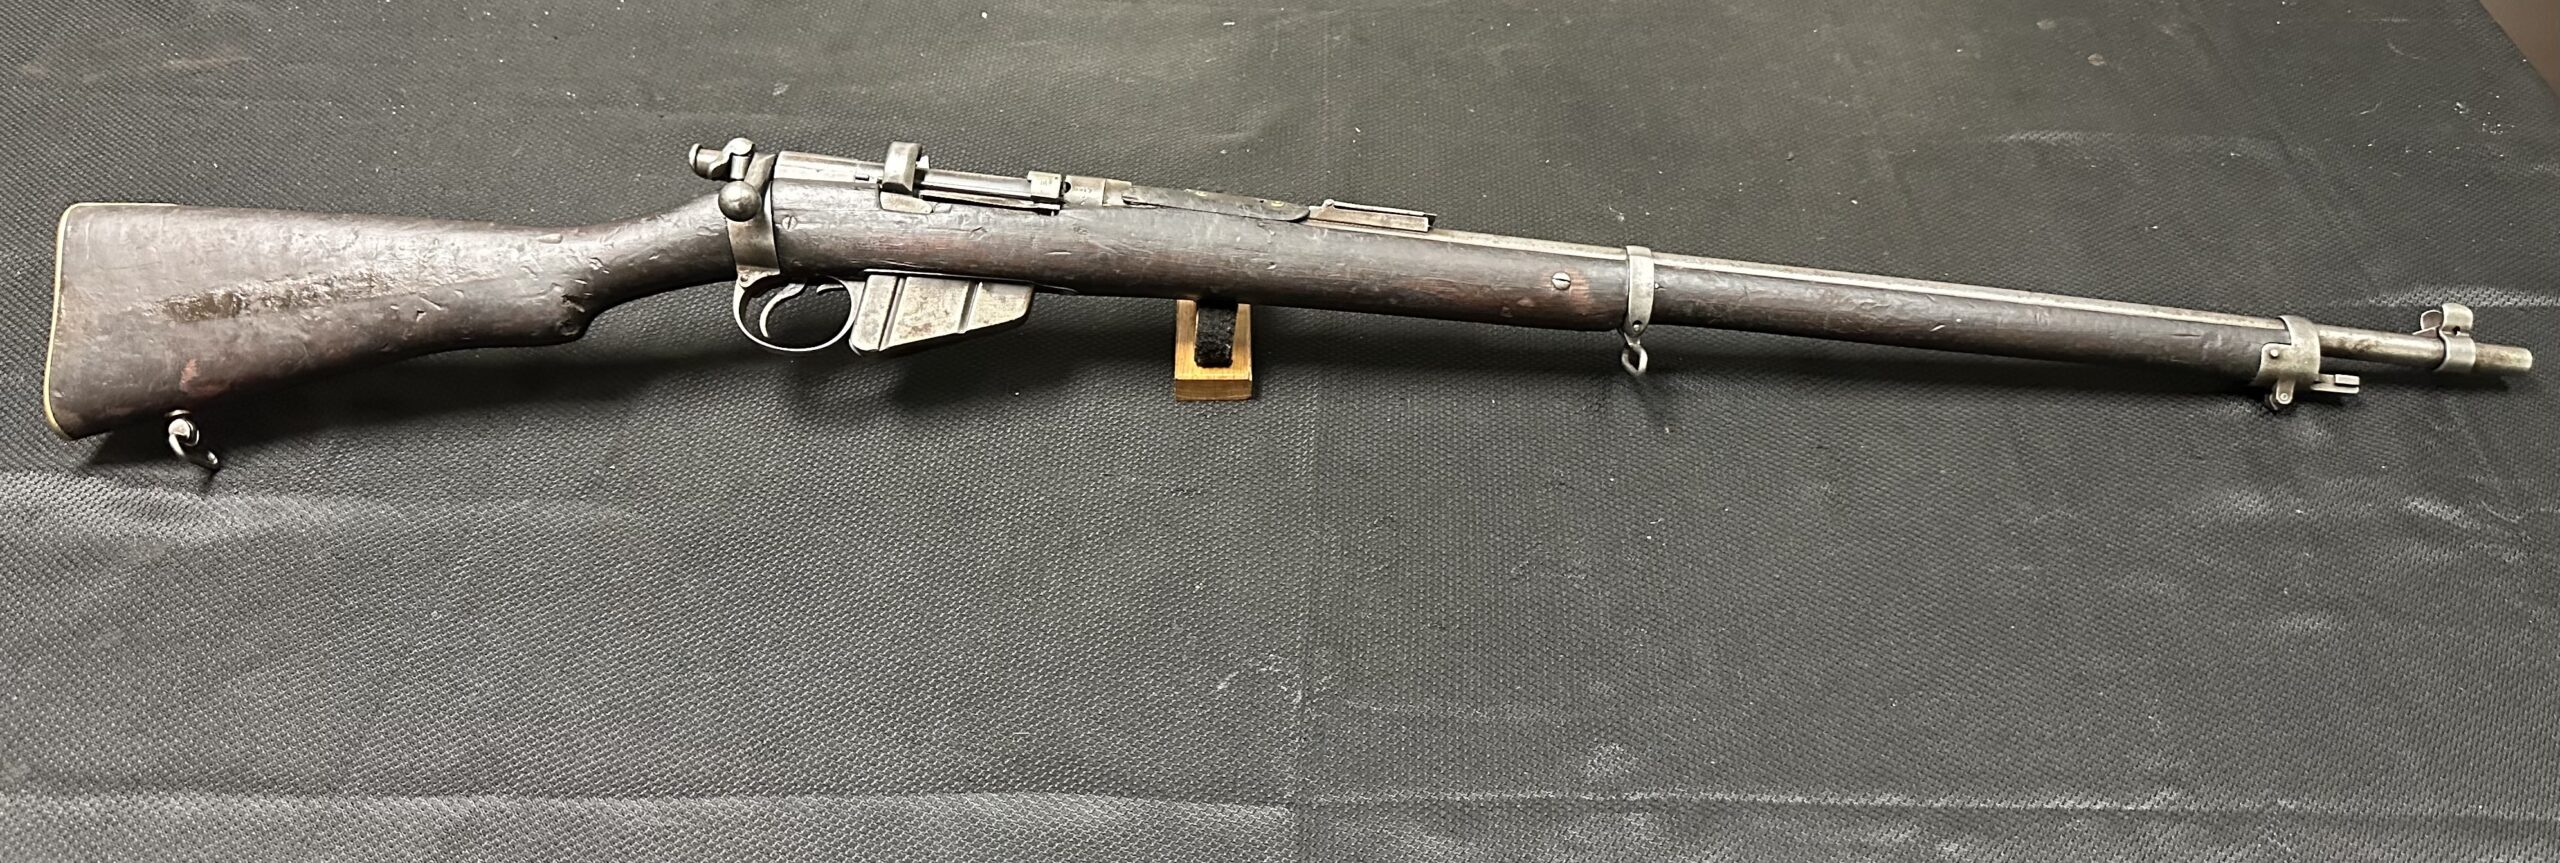 Fun Fact: The Lee Enfield cost more to produce than the M1 Garand